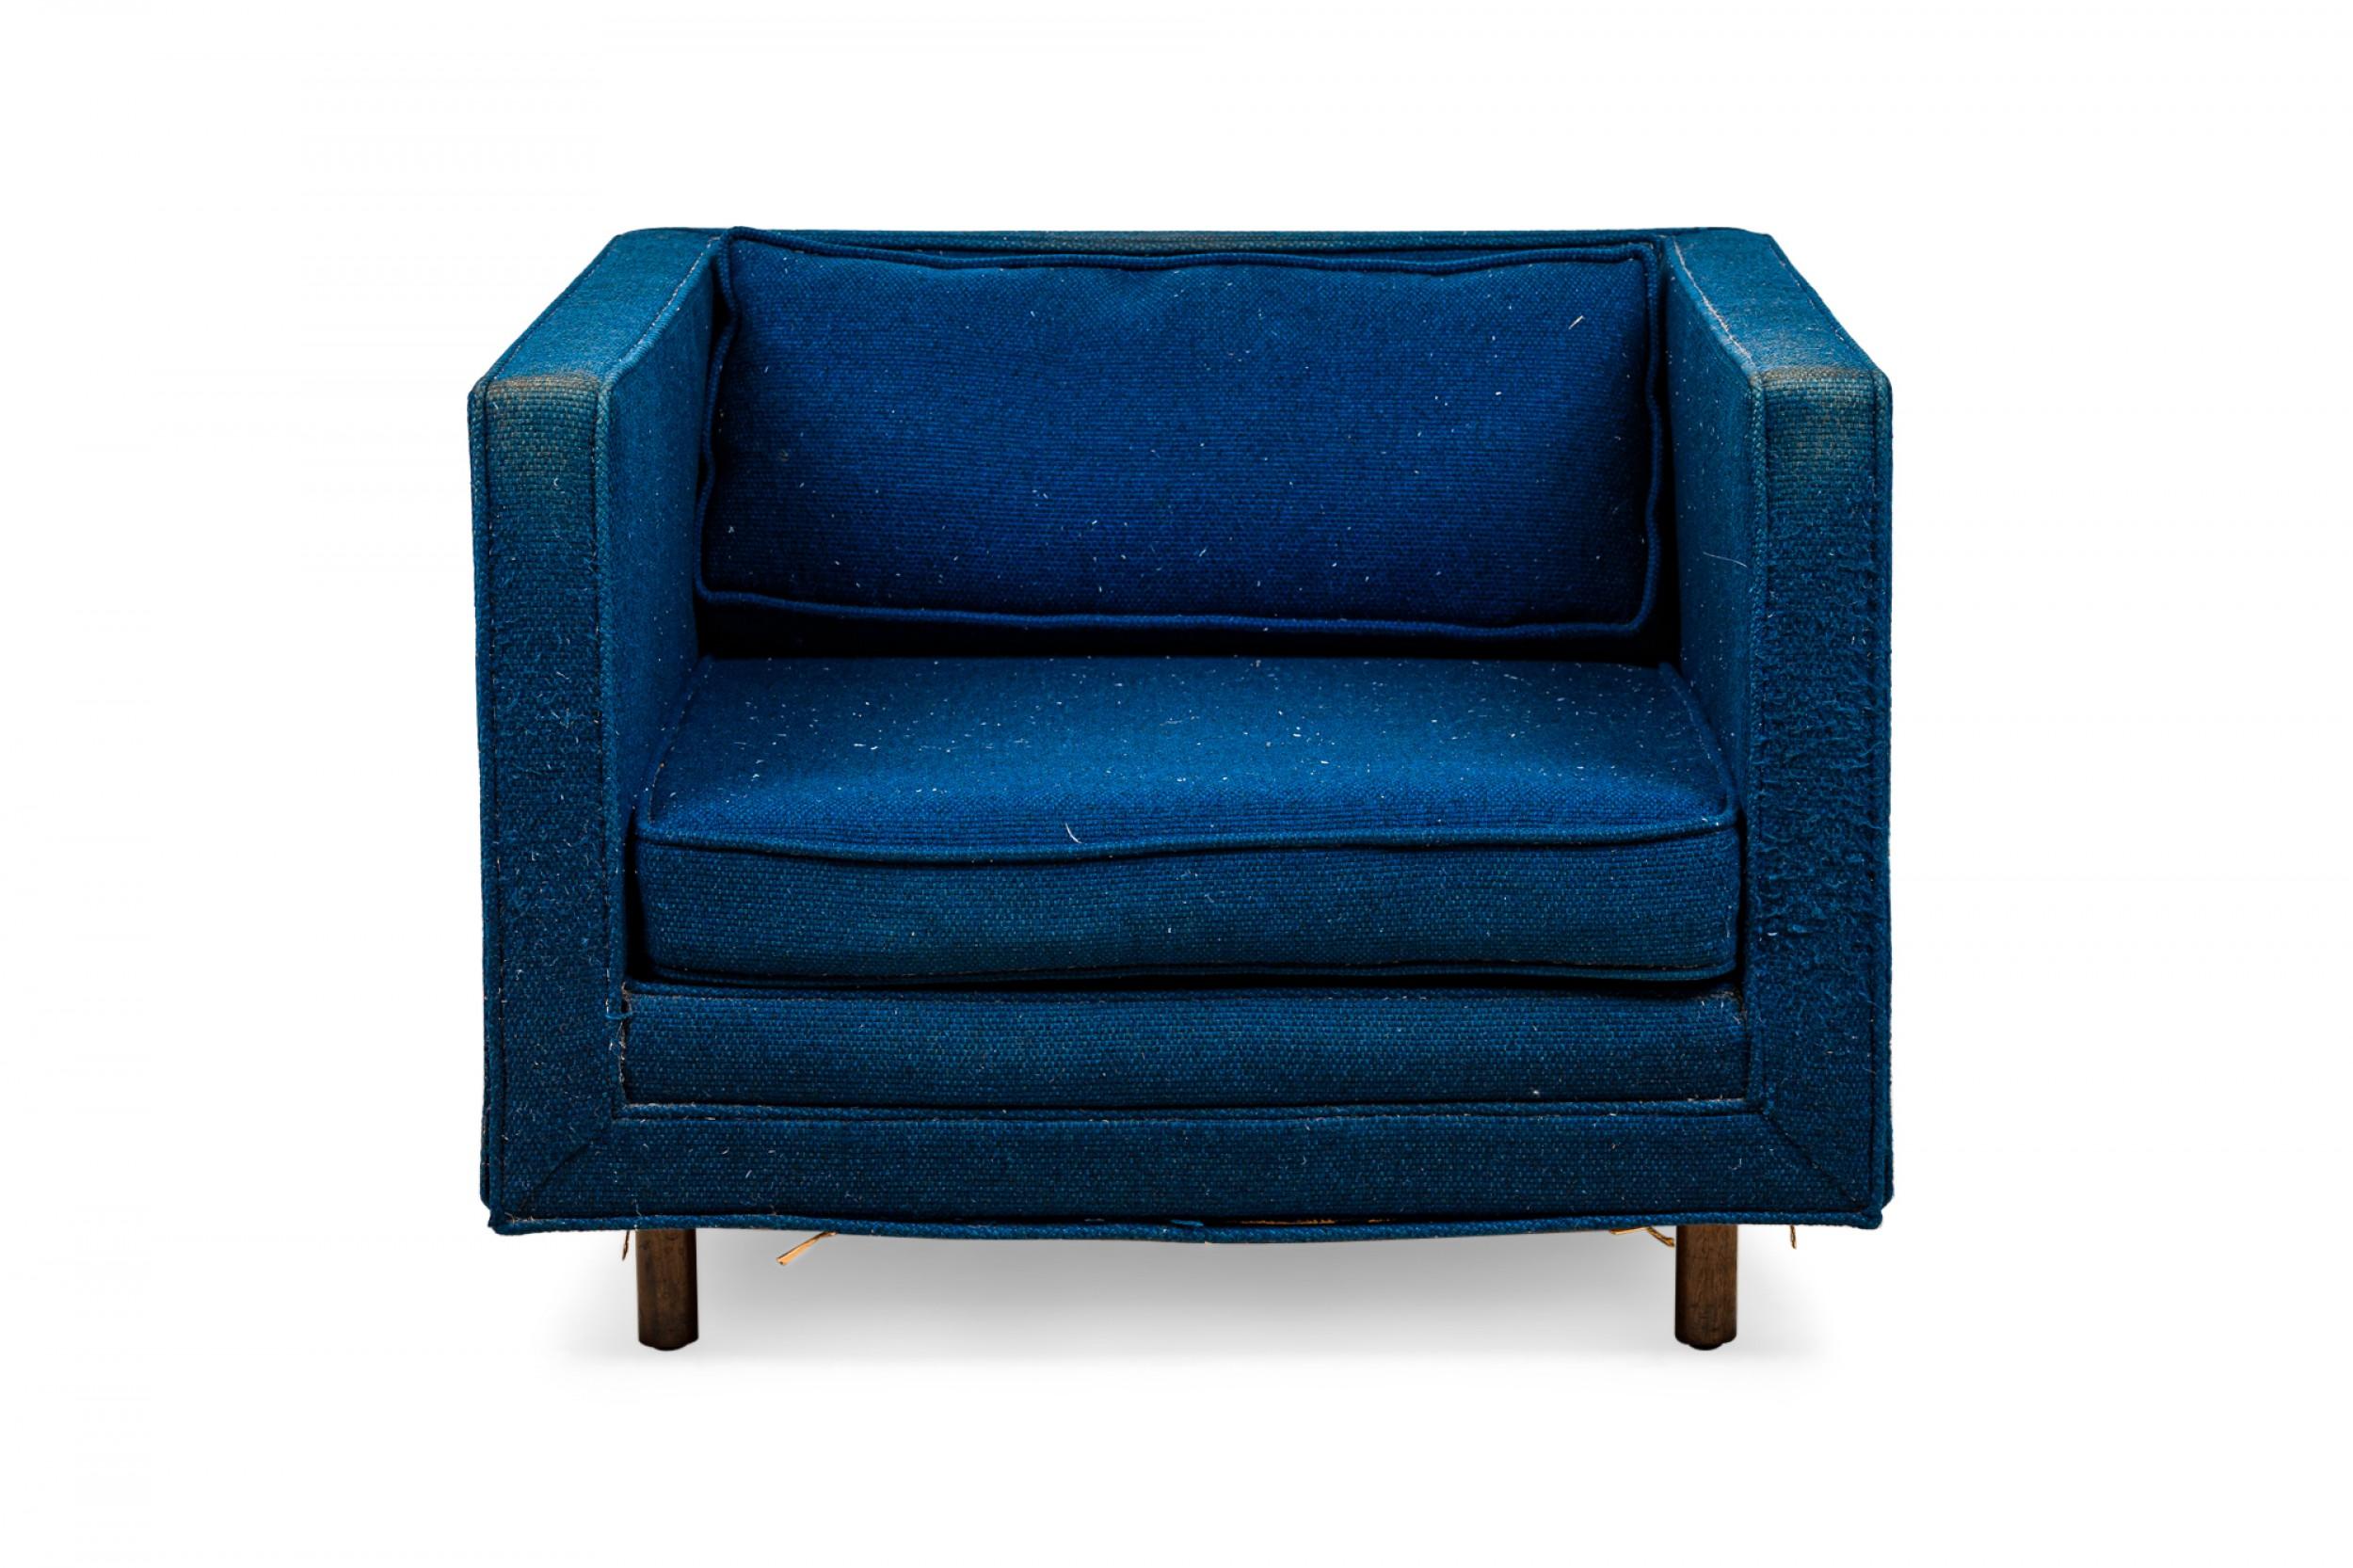 American Mid-Century cube form lounge / armchair with textured royal blue fabric upholstery and a matching removable back cushion. (HARVEY PROBBER)(Available in black: DUF0509B).
 